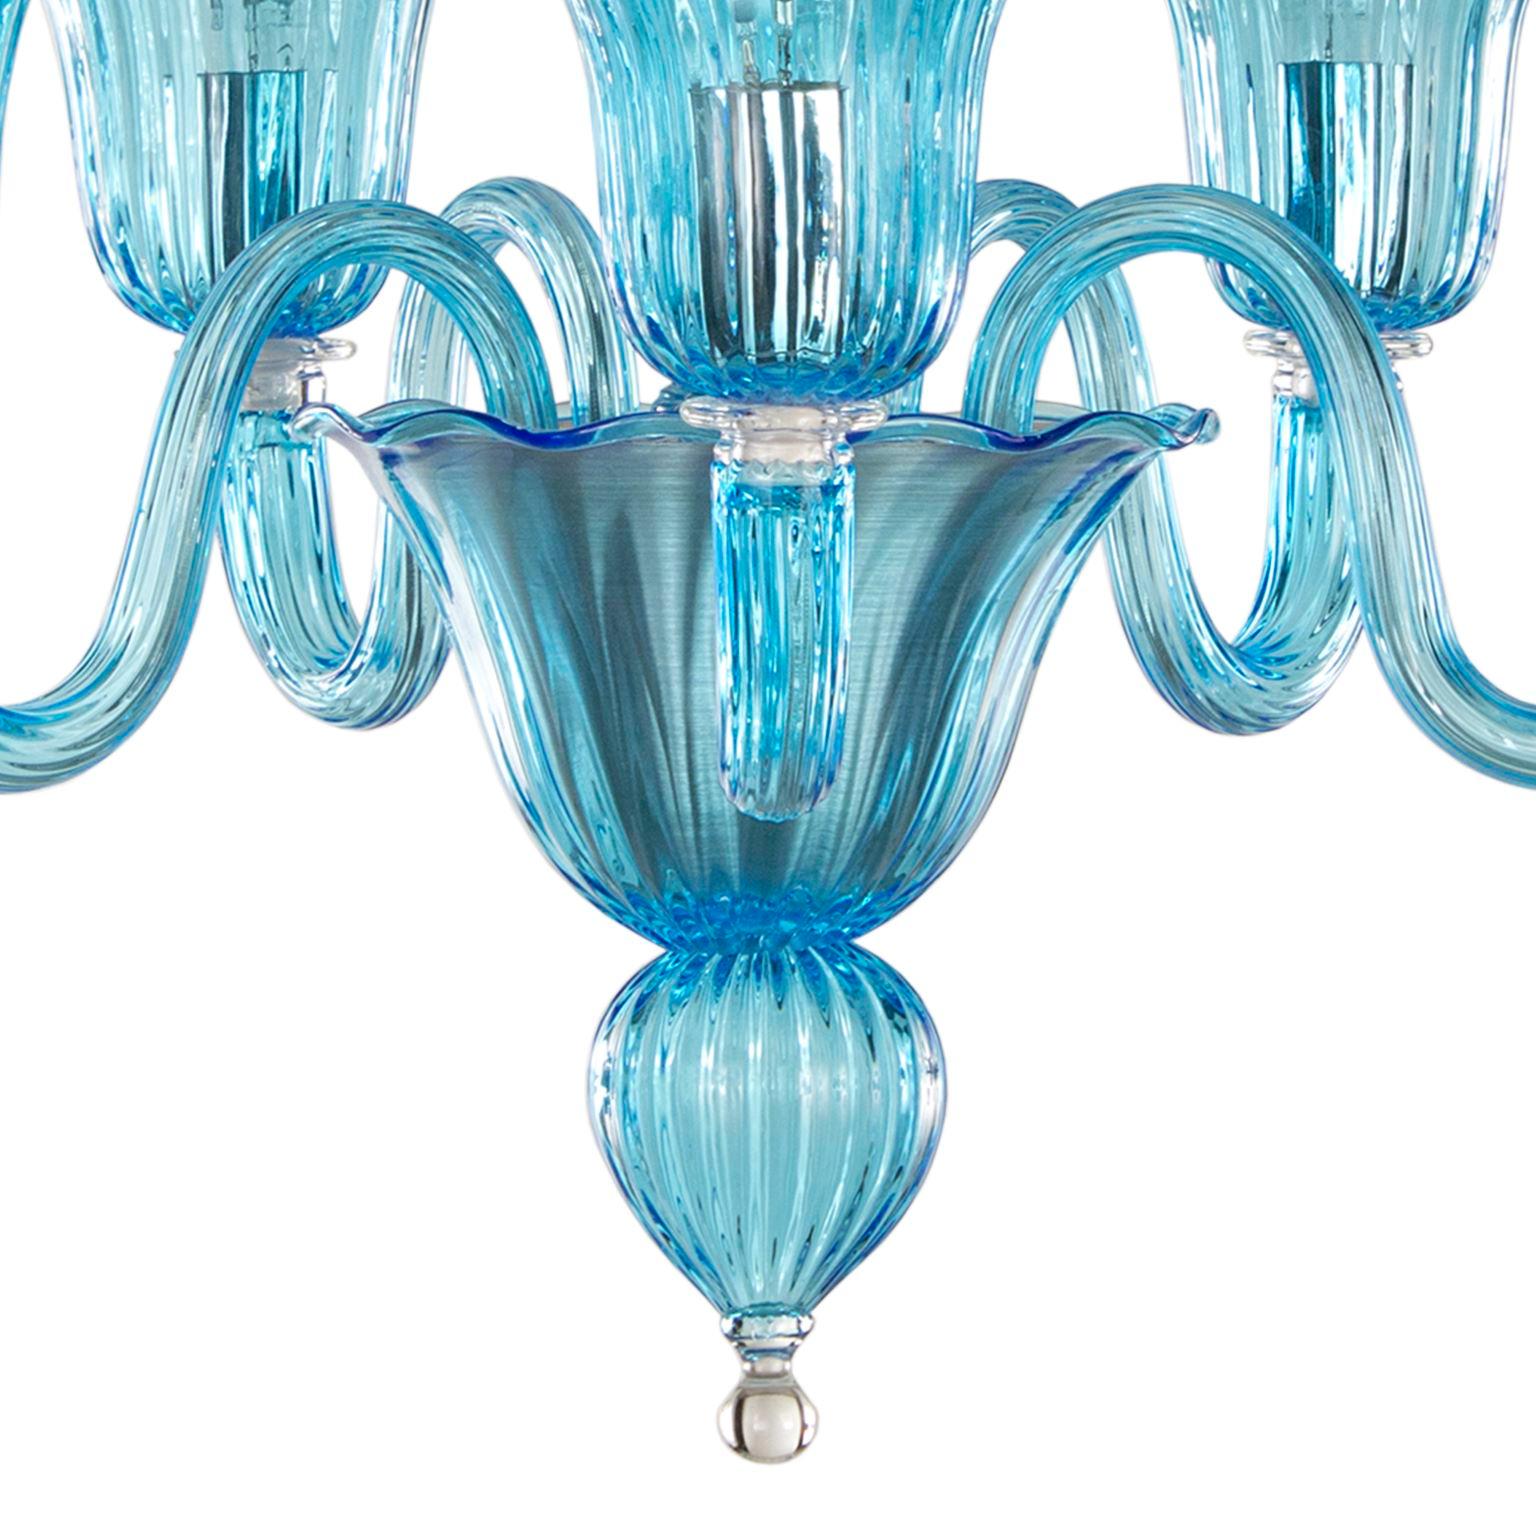 Italian 21st Century Chandelier 5 Arms, Rigadin Aquamarine Murano Glass by Multiforme For Sale